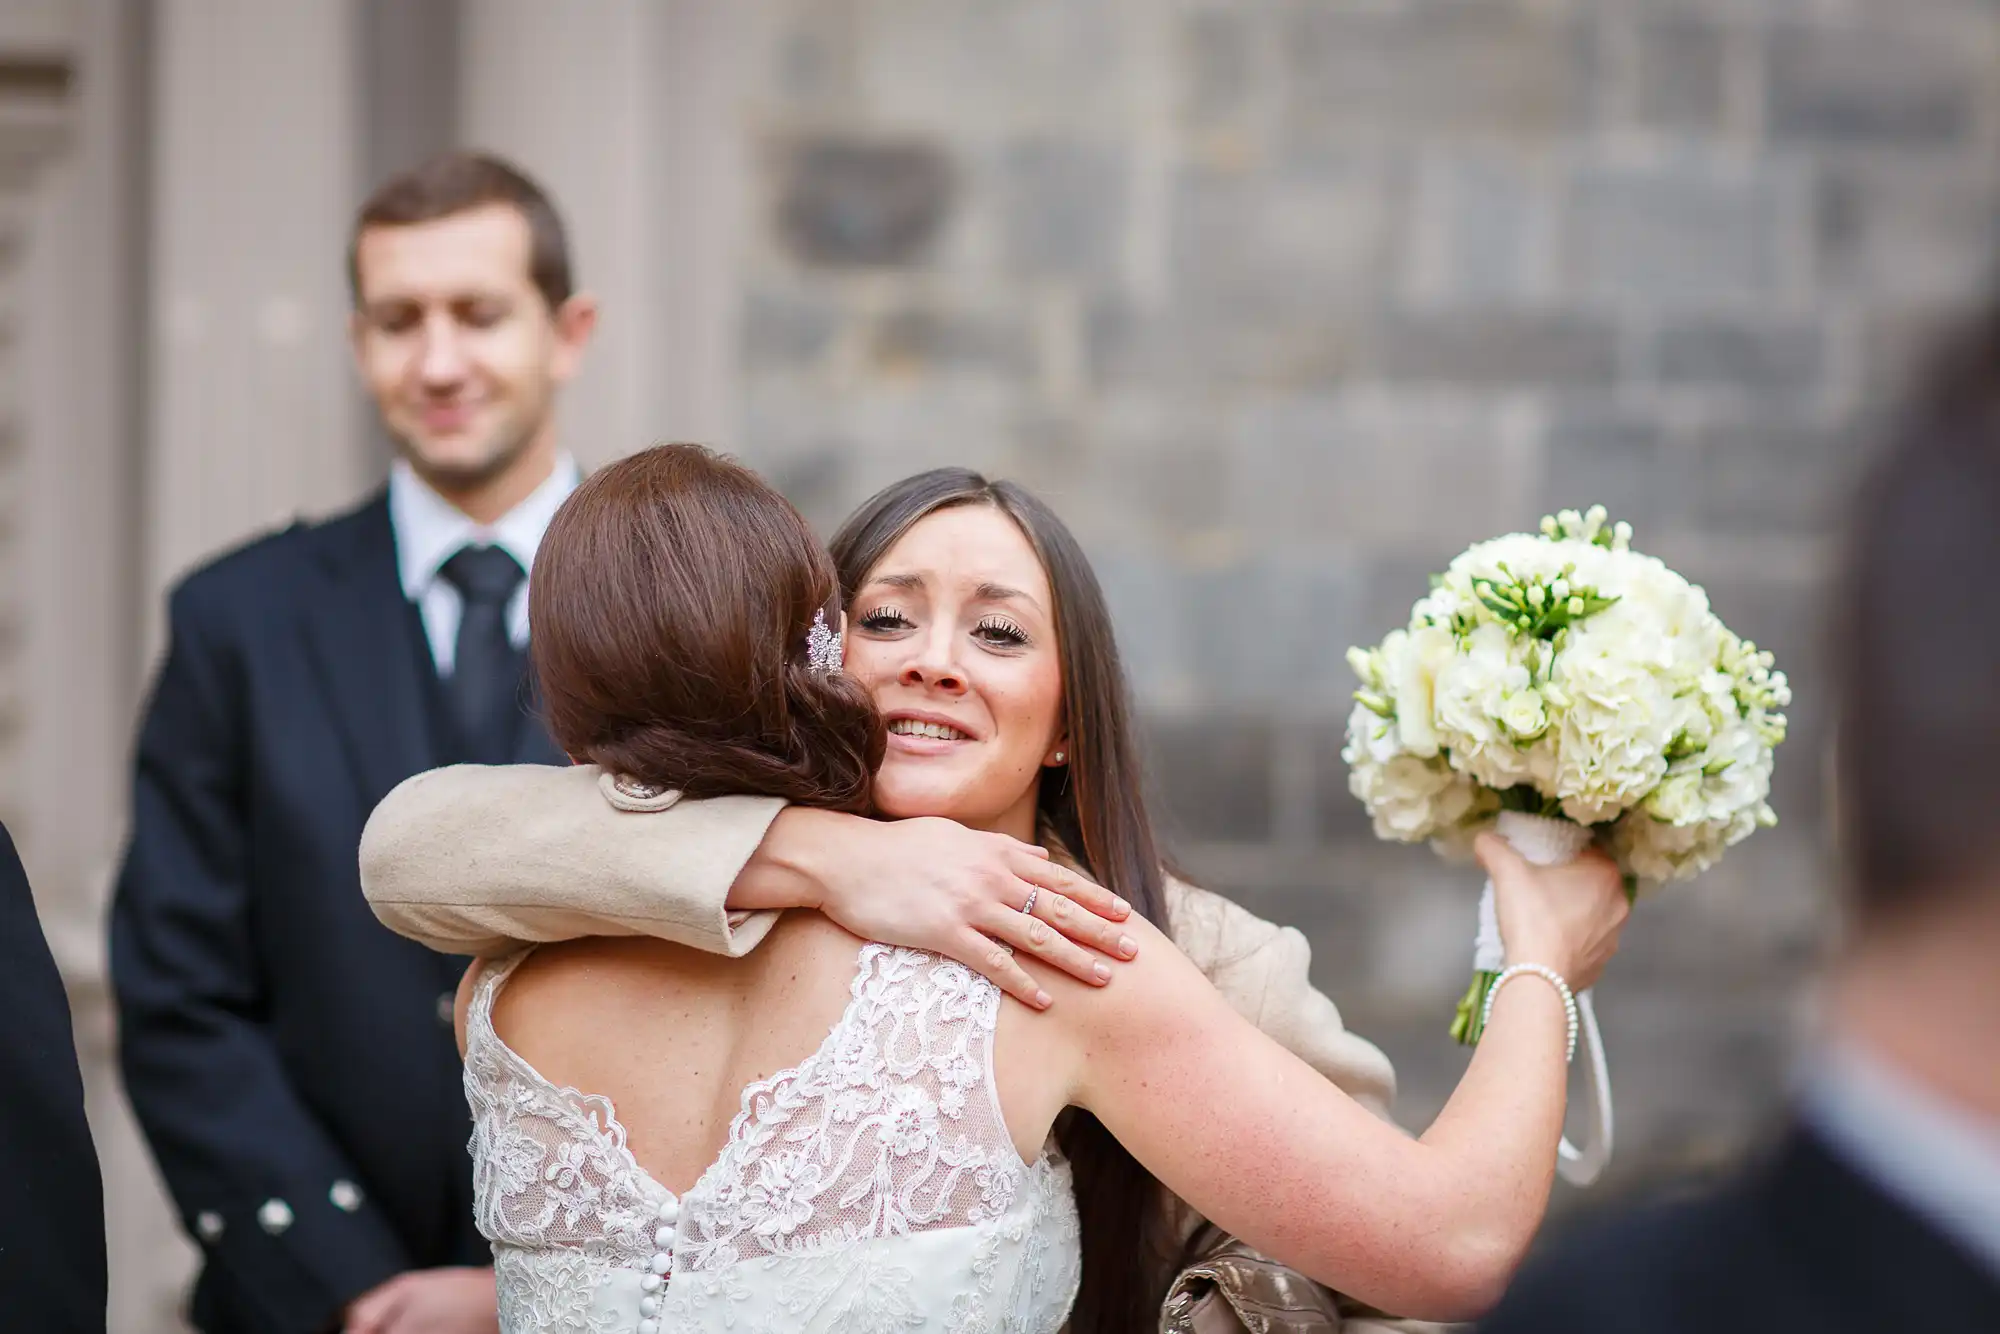 Bride in a lace dress hugs a guest, holding a white bouquet, with a smiling groom in the background.